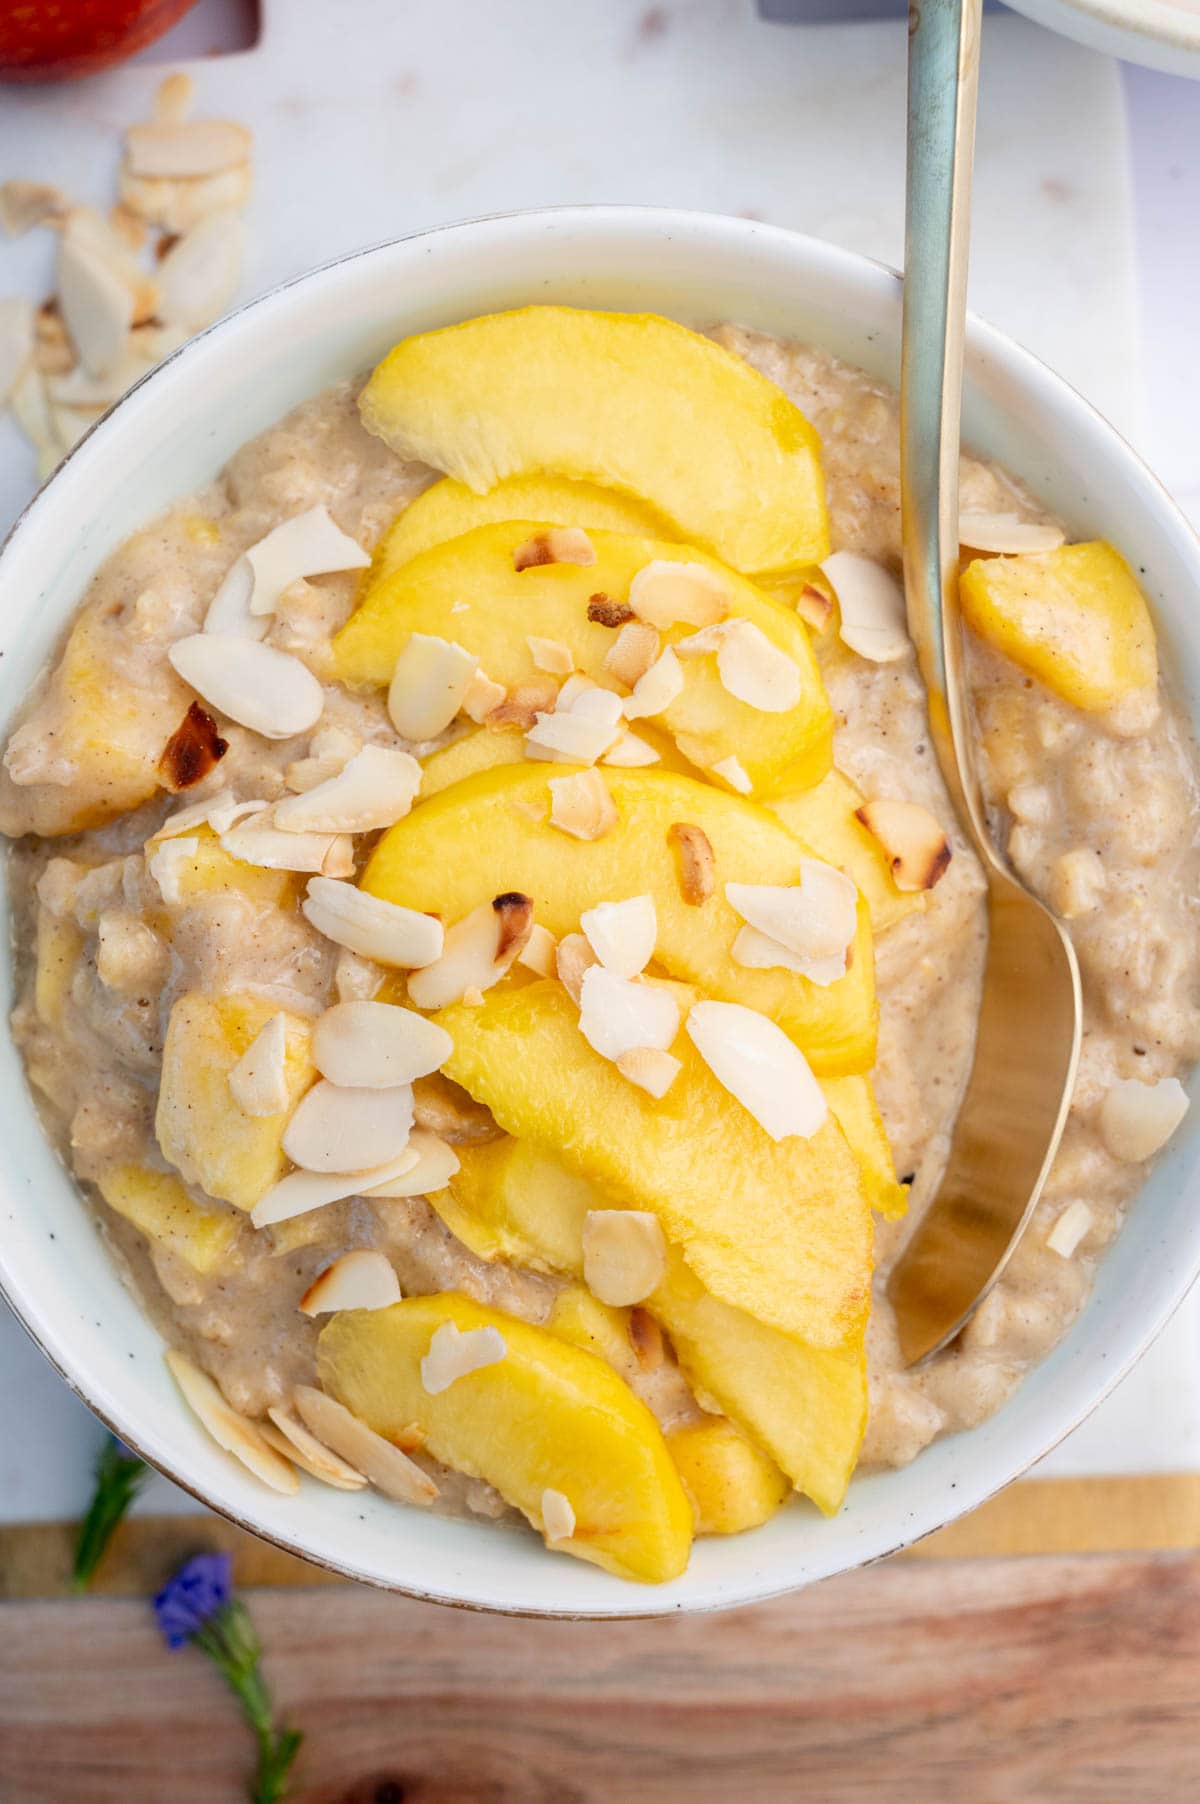 Peach oatmeal in a white bowl topped with peach slices and almond flakes.